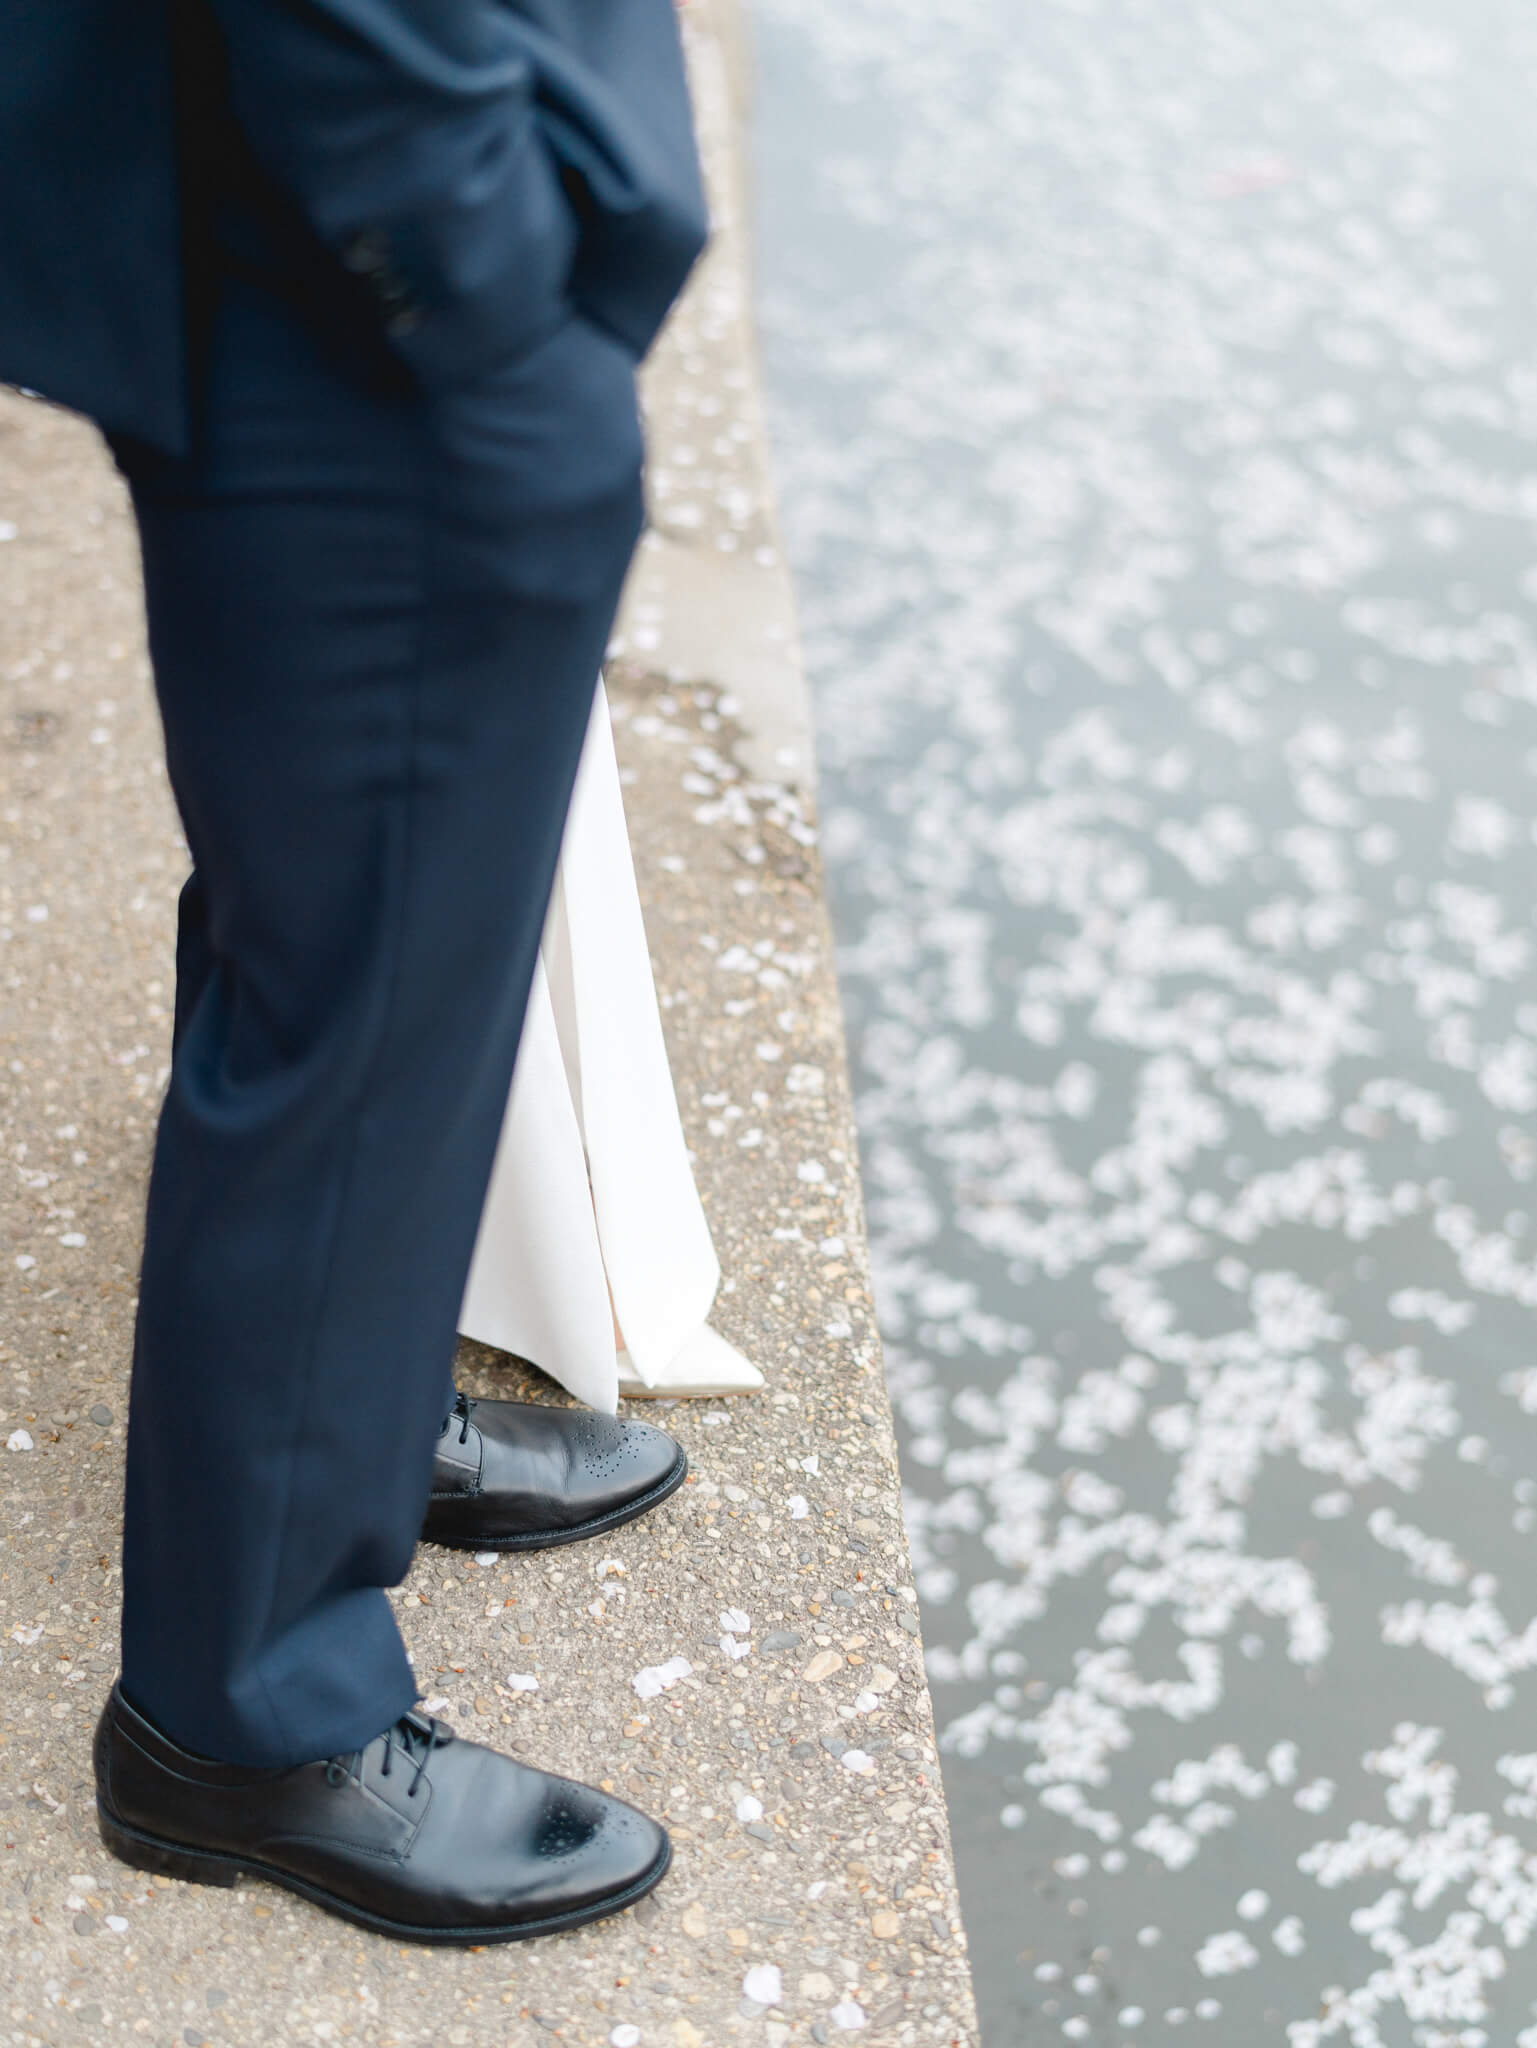 Closeup of a bride and groom's feet standing at the edge of the tidal basin with petals floating in the water